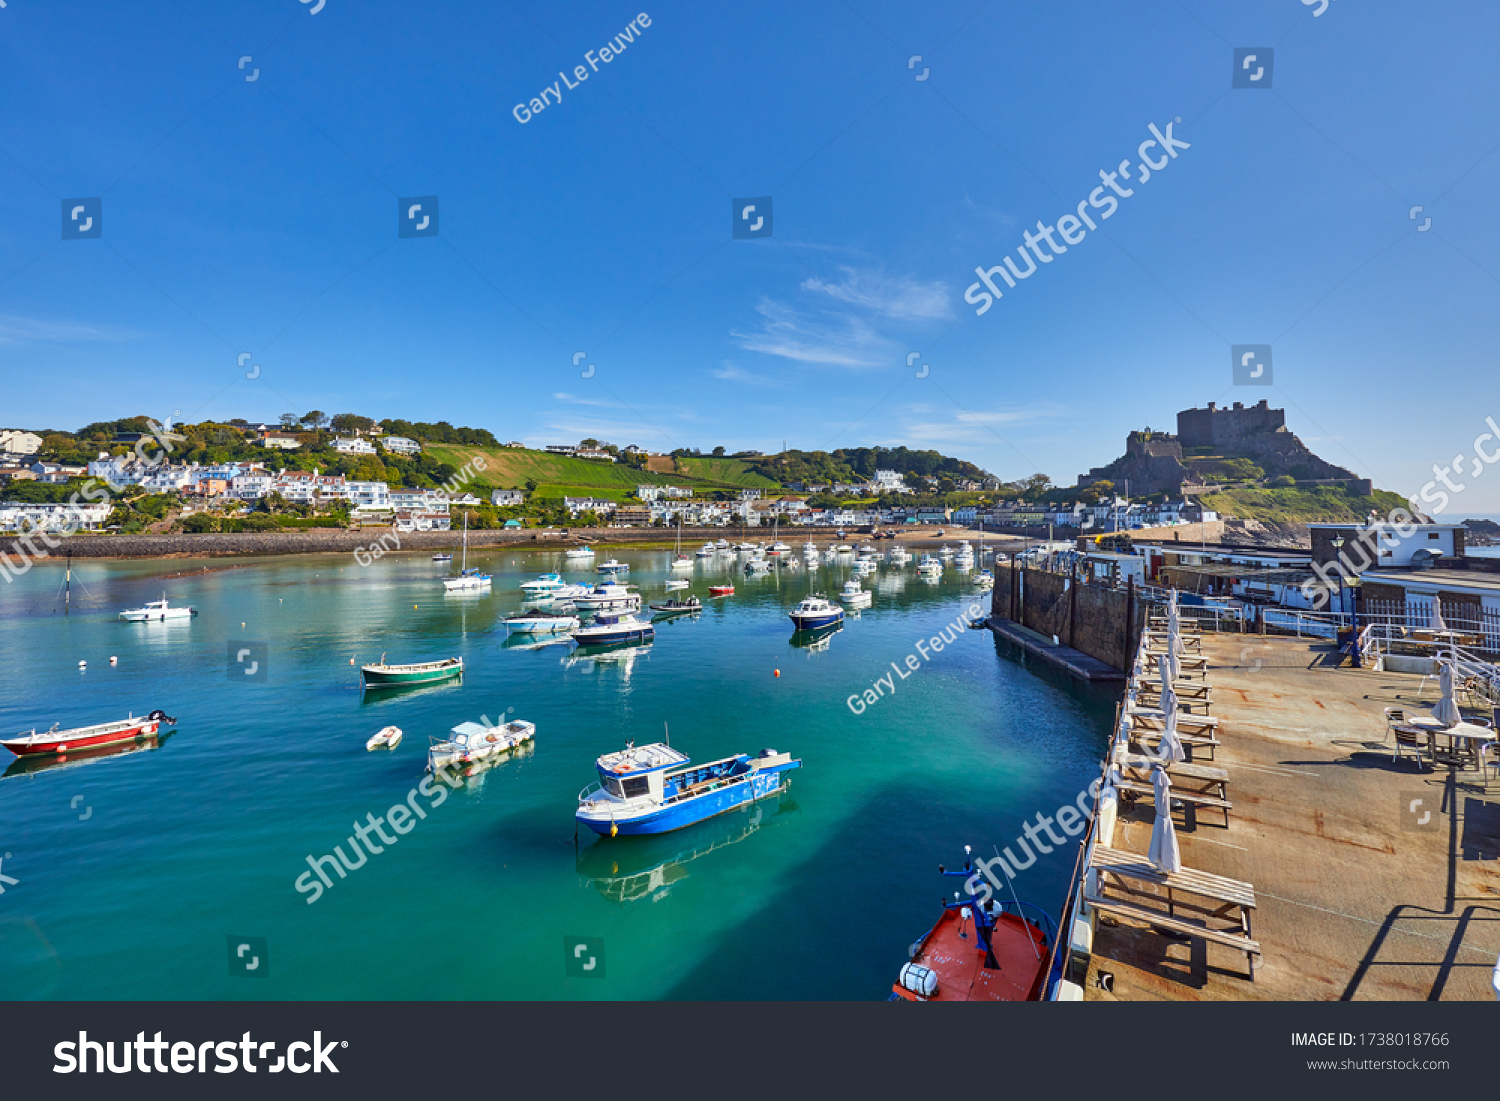 Image of Gorey Harbour with fishing and pleasure boats, the pier bullworks and Gorey Castle in the background with blue sky. Jersey, Channel Islands, UK #1738018766